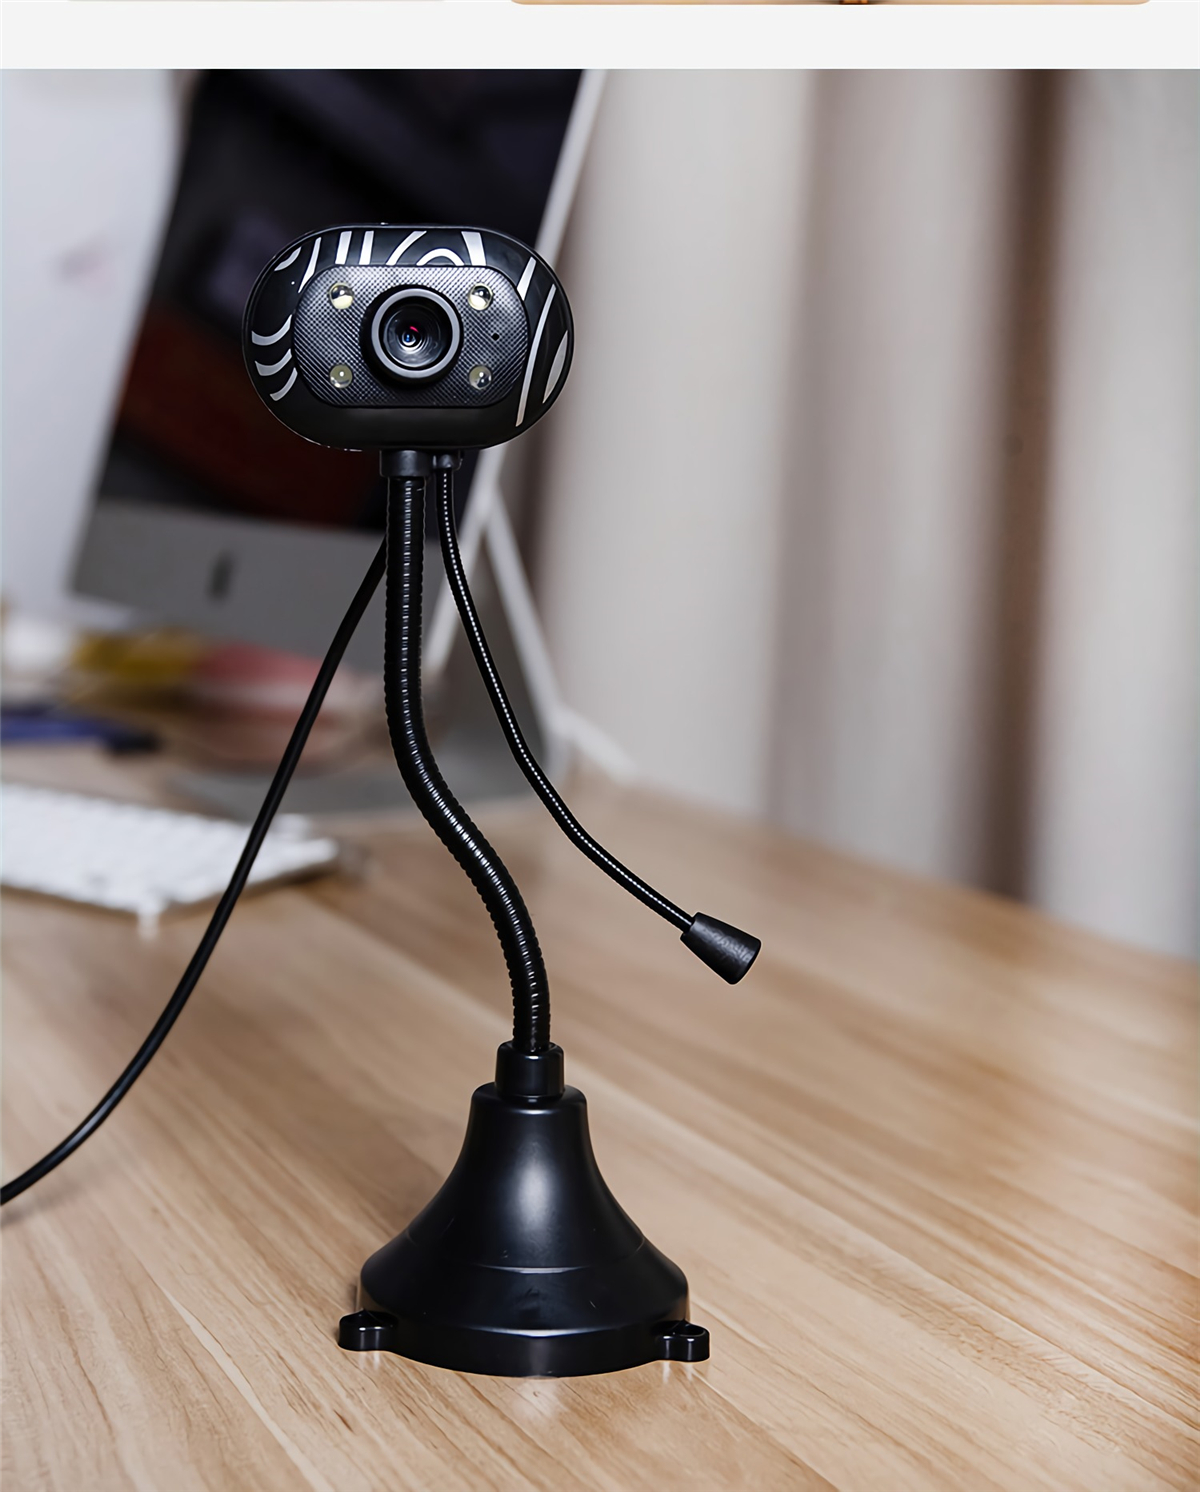 480P-HD-Webcam-CMOS-USB-20-Wired-Computer-Web-Camera-Built-in-Microphone-Camera-for-Desktop-Computer-1891956-11